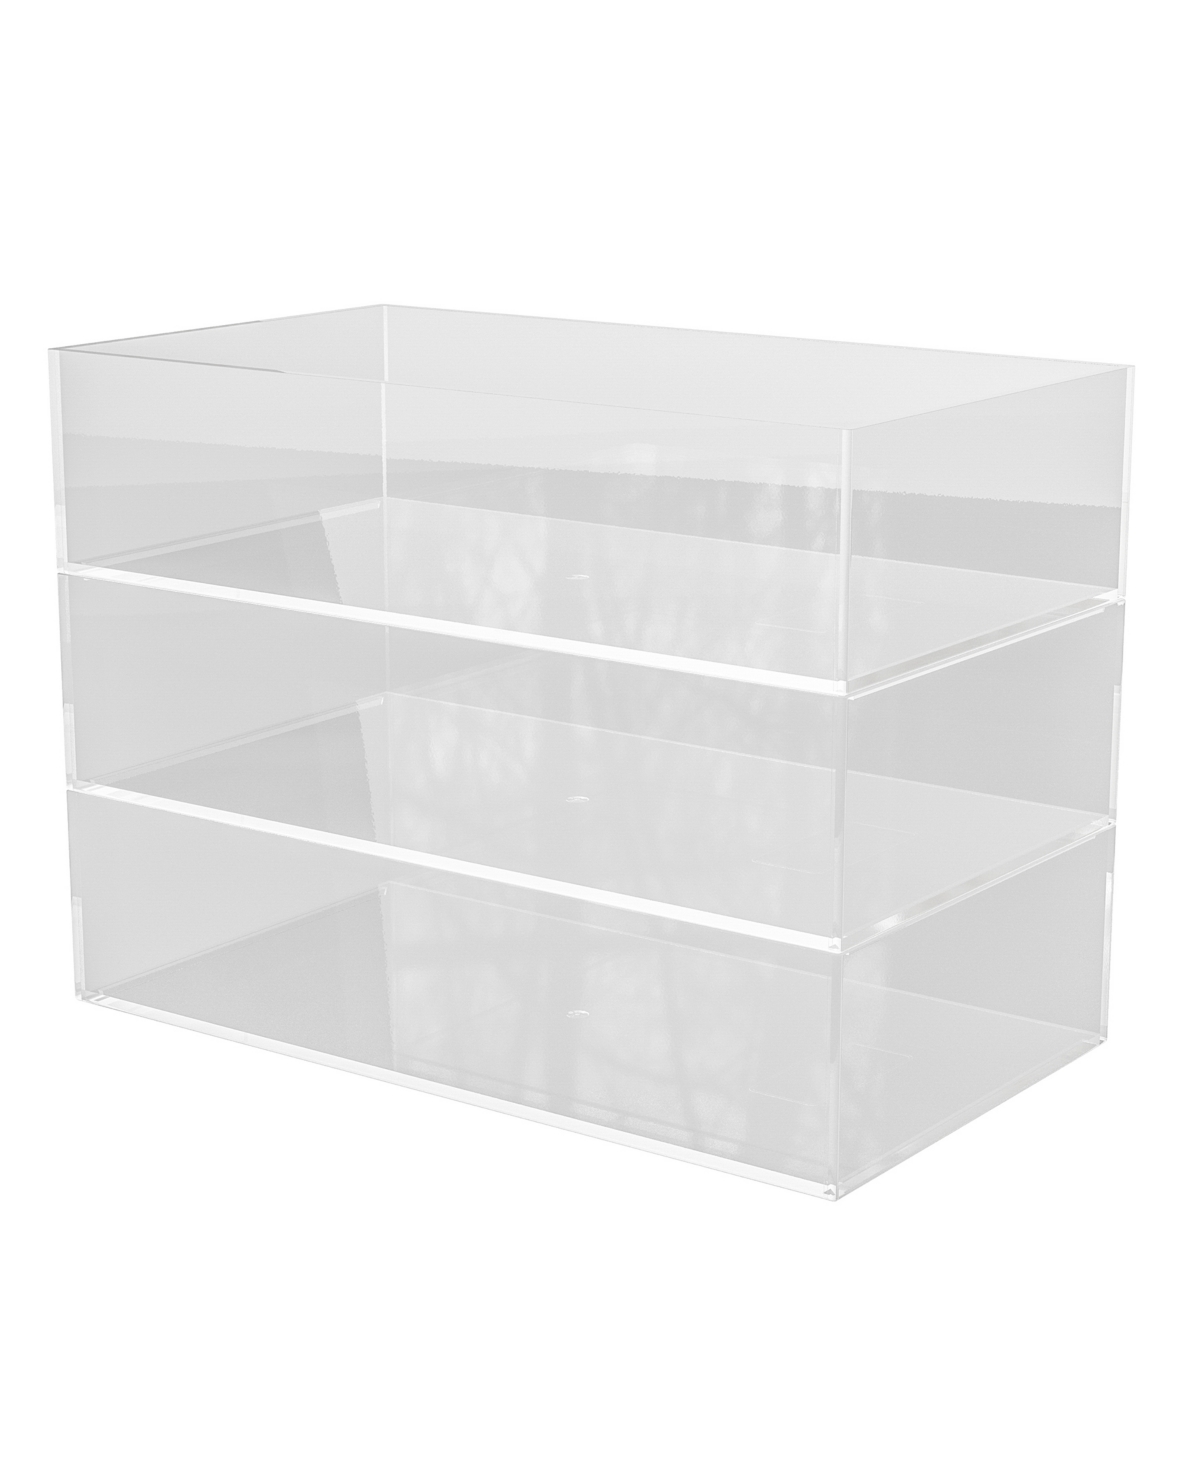 Martha Stewart Brody 3 Pack Stack And Slide Plastic Tray Office Desktop Organizer, 3" X 7.5" In Clear